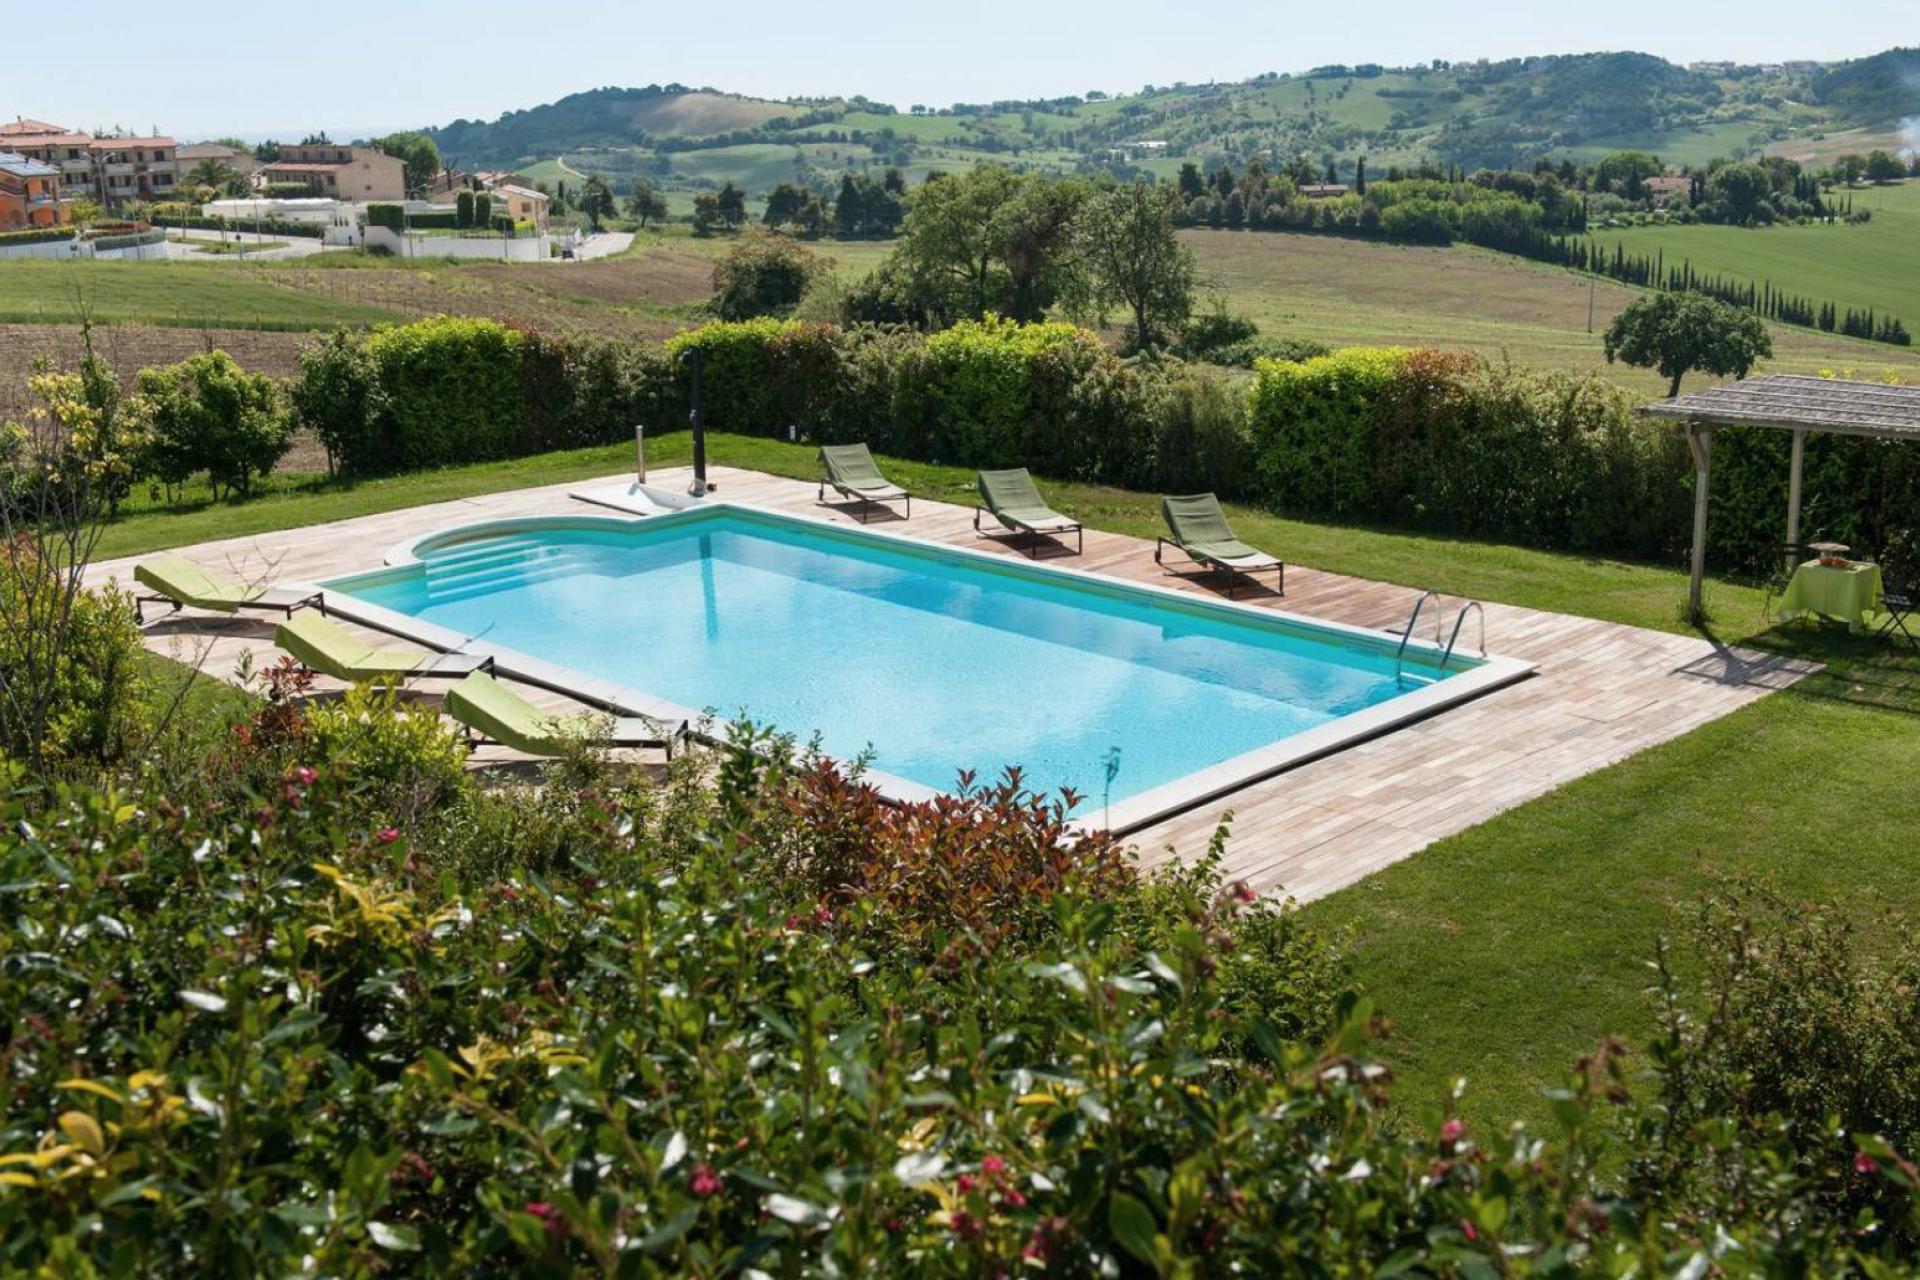 Agriturismo Marche Stylish agriturismo Marche with amazing views